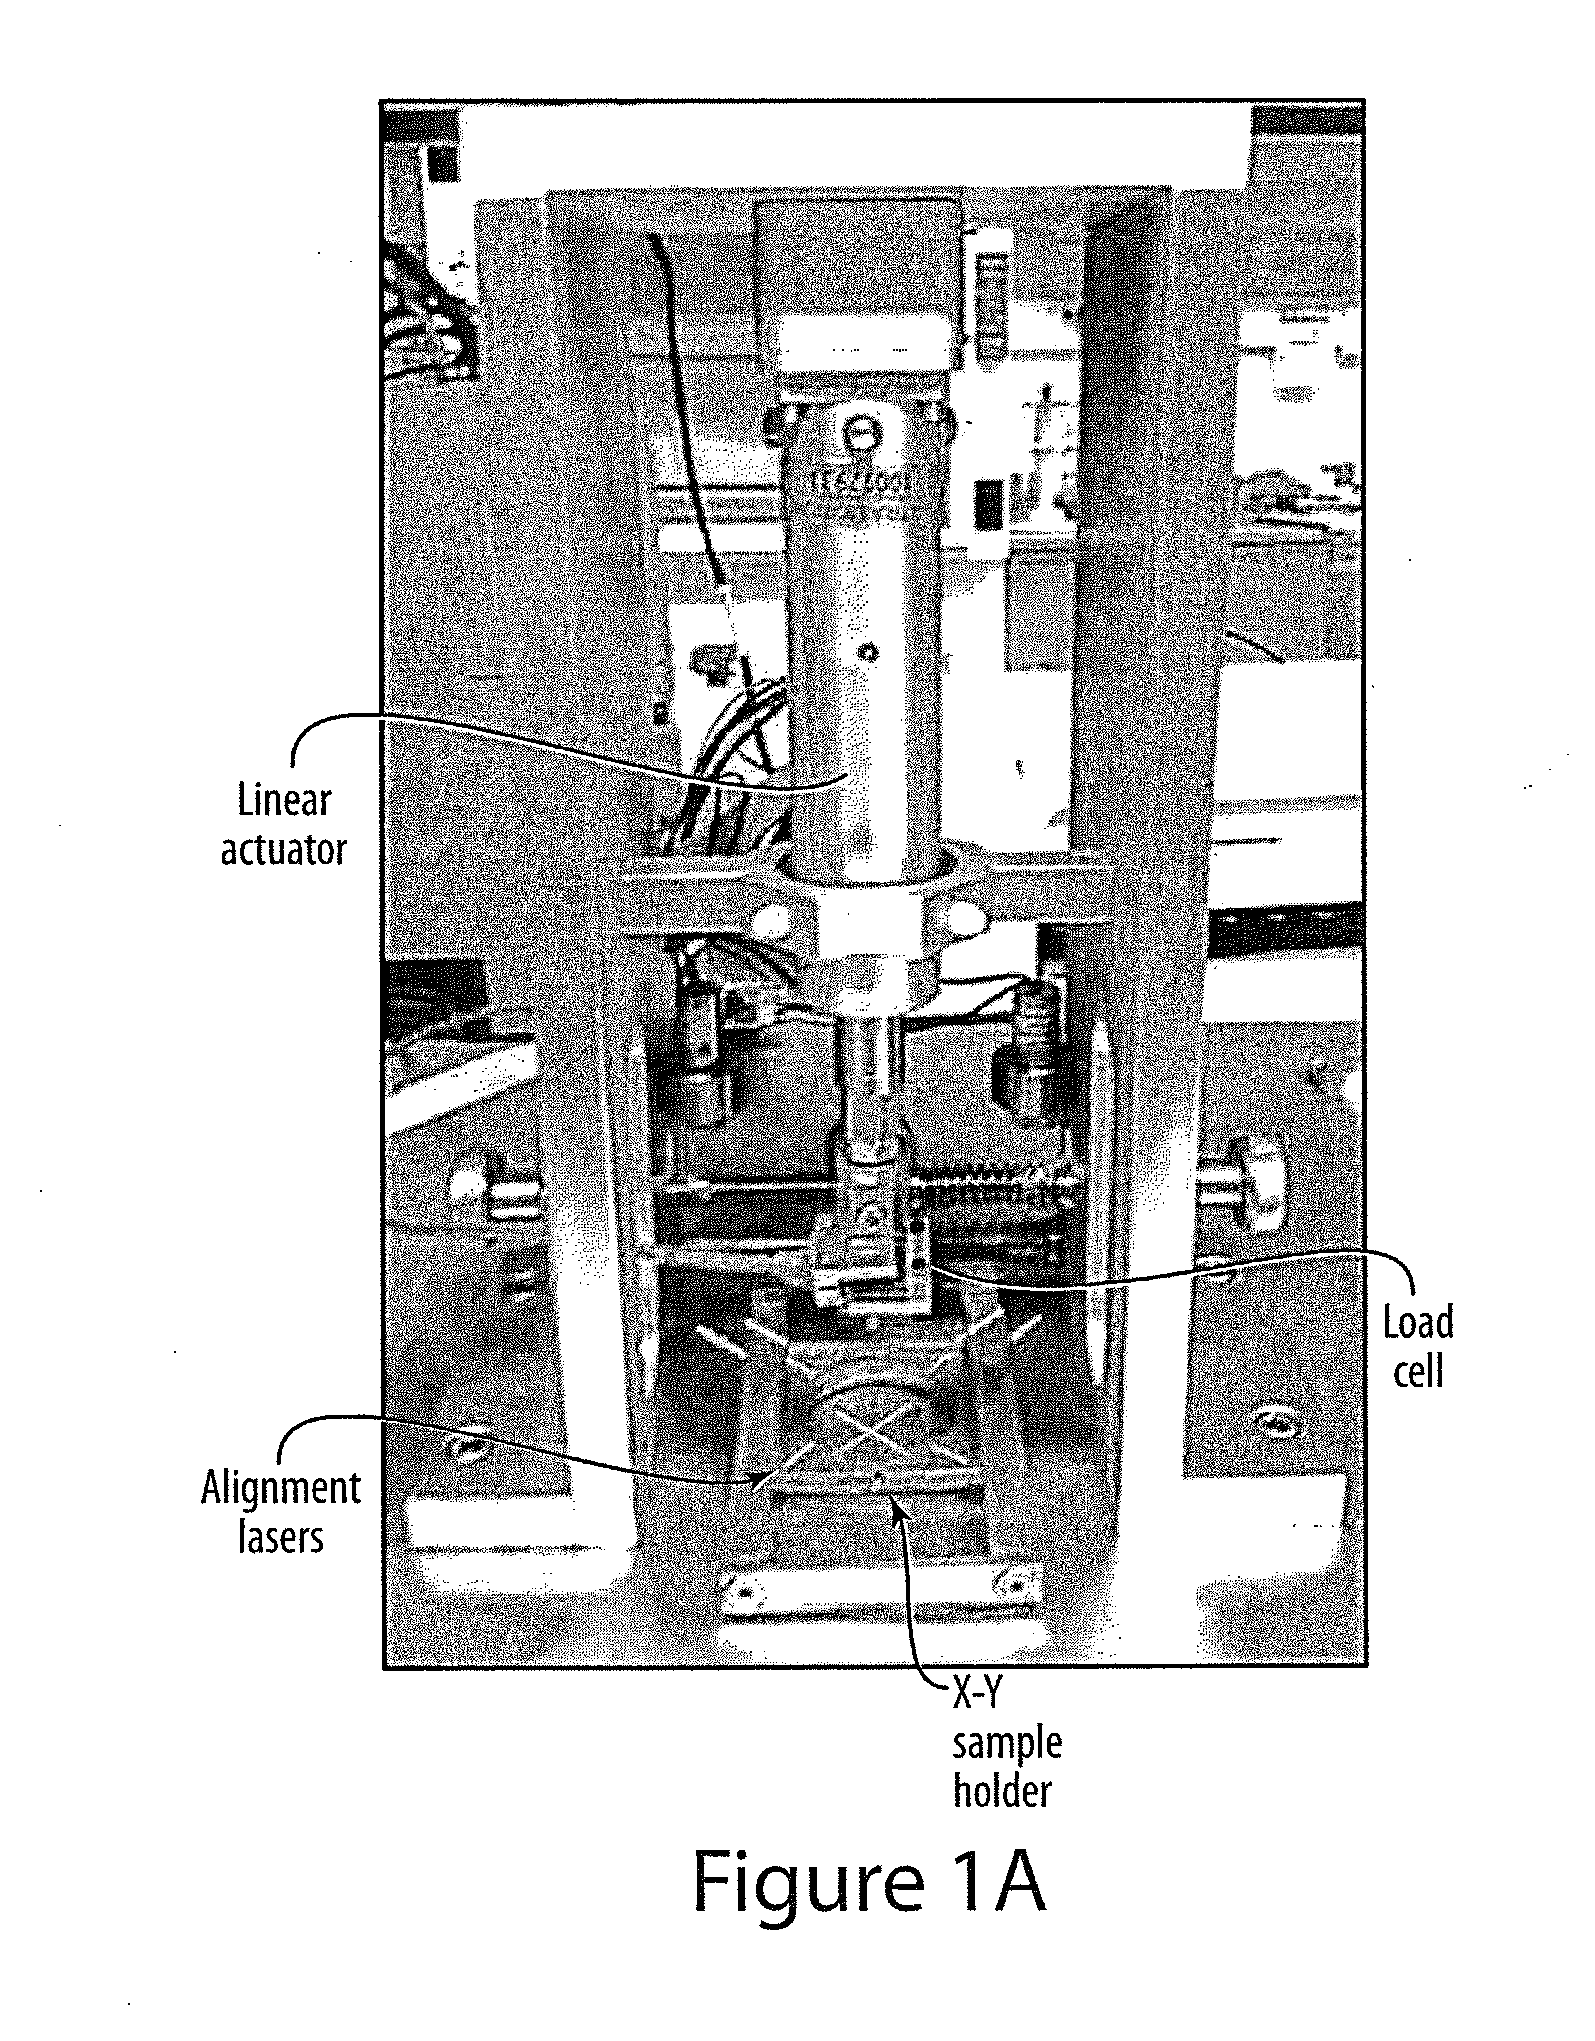 Device and system for mechanical measurement of biomaterial